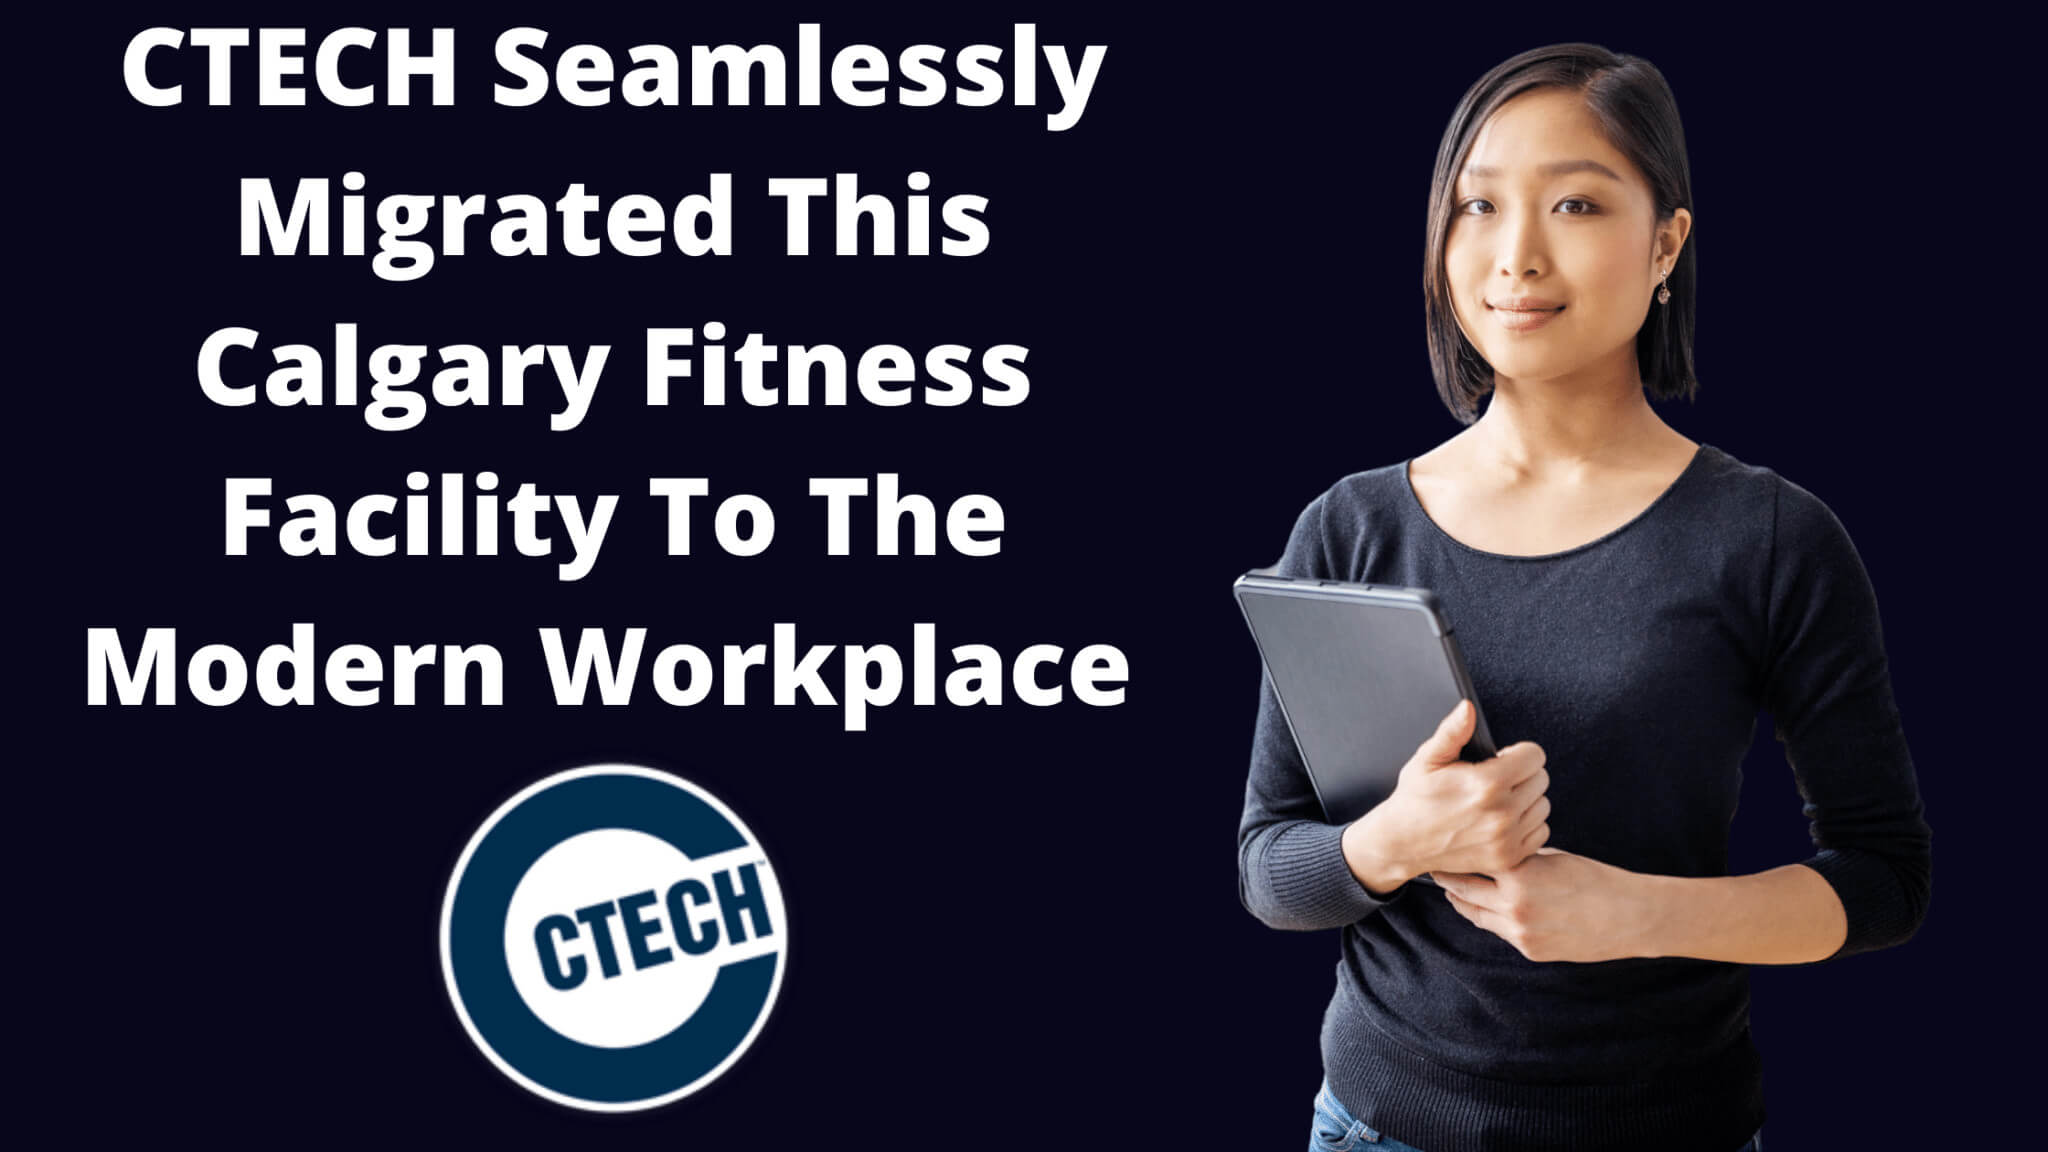 CTECH Seamlessly Migrated This Calgary Fitness Facility To The Modern Workplace 